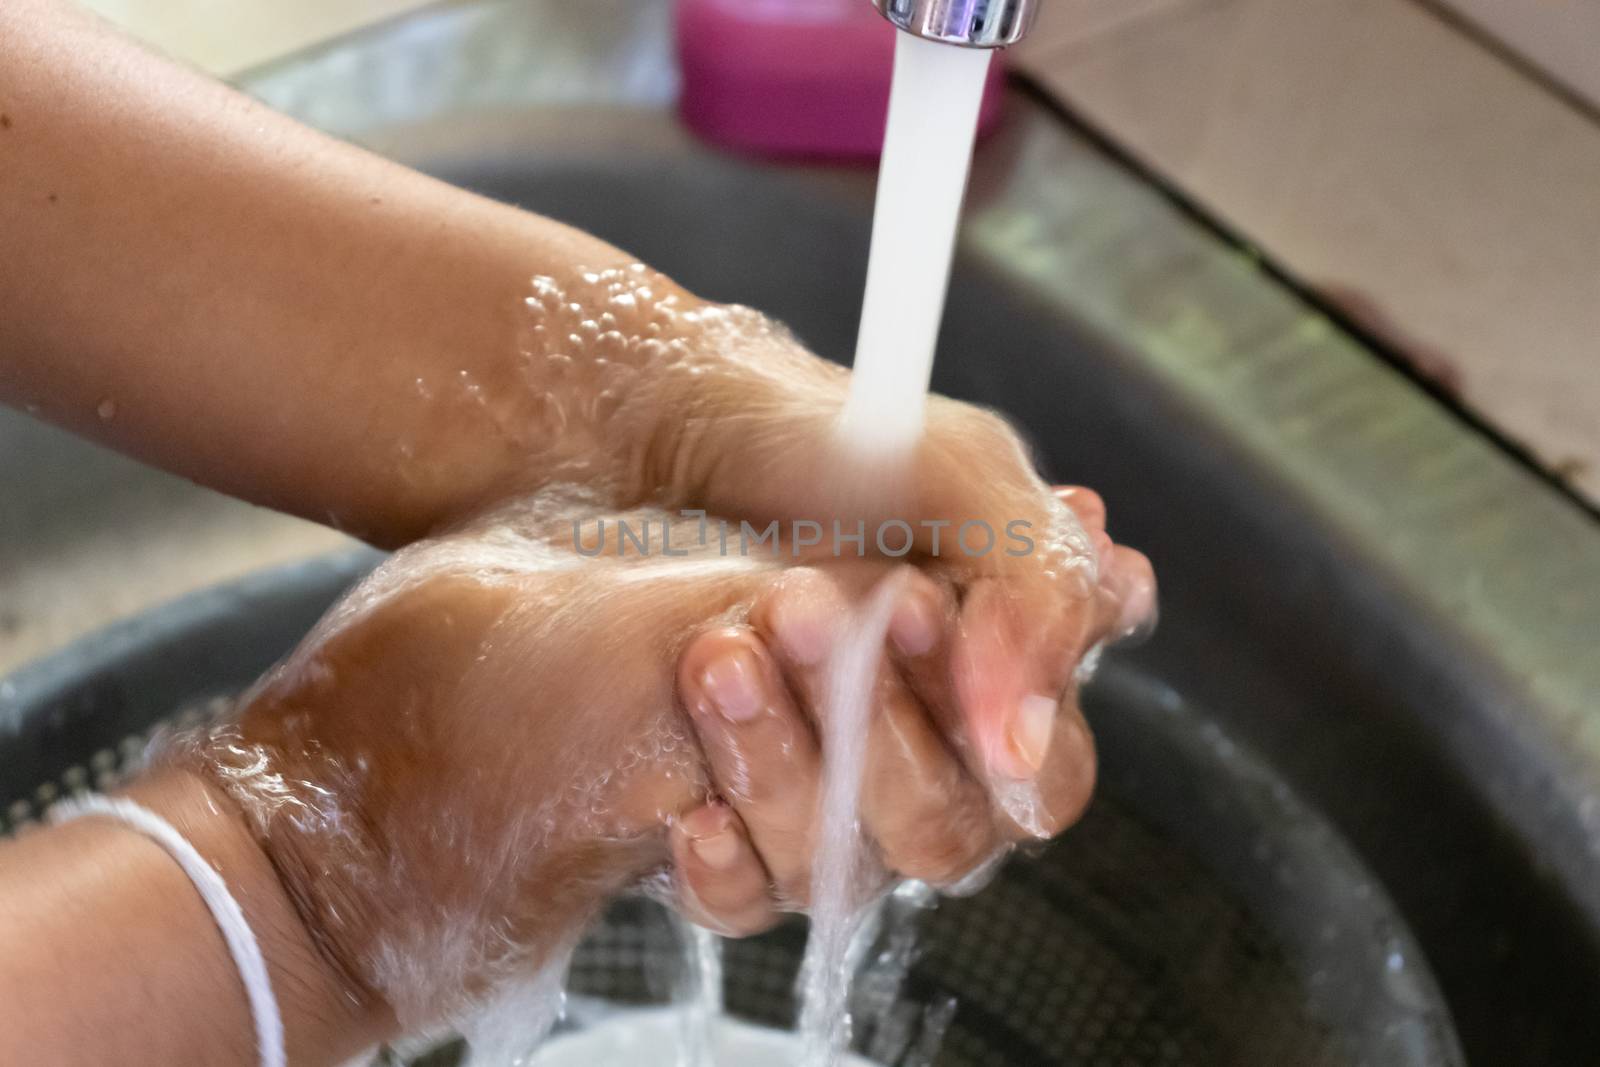 applying soap and washing with clean running water